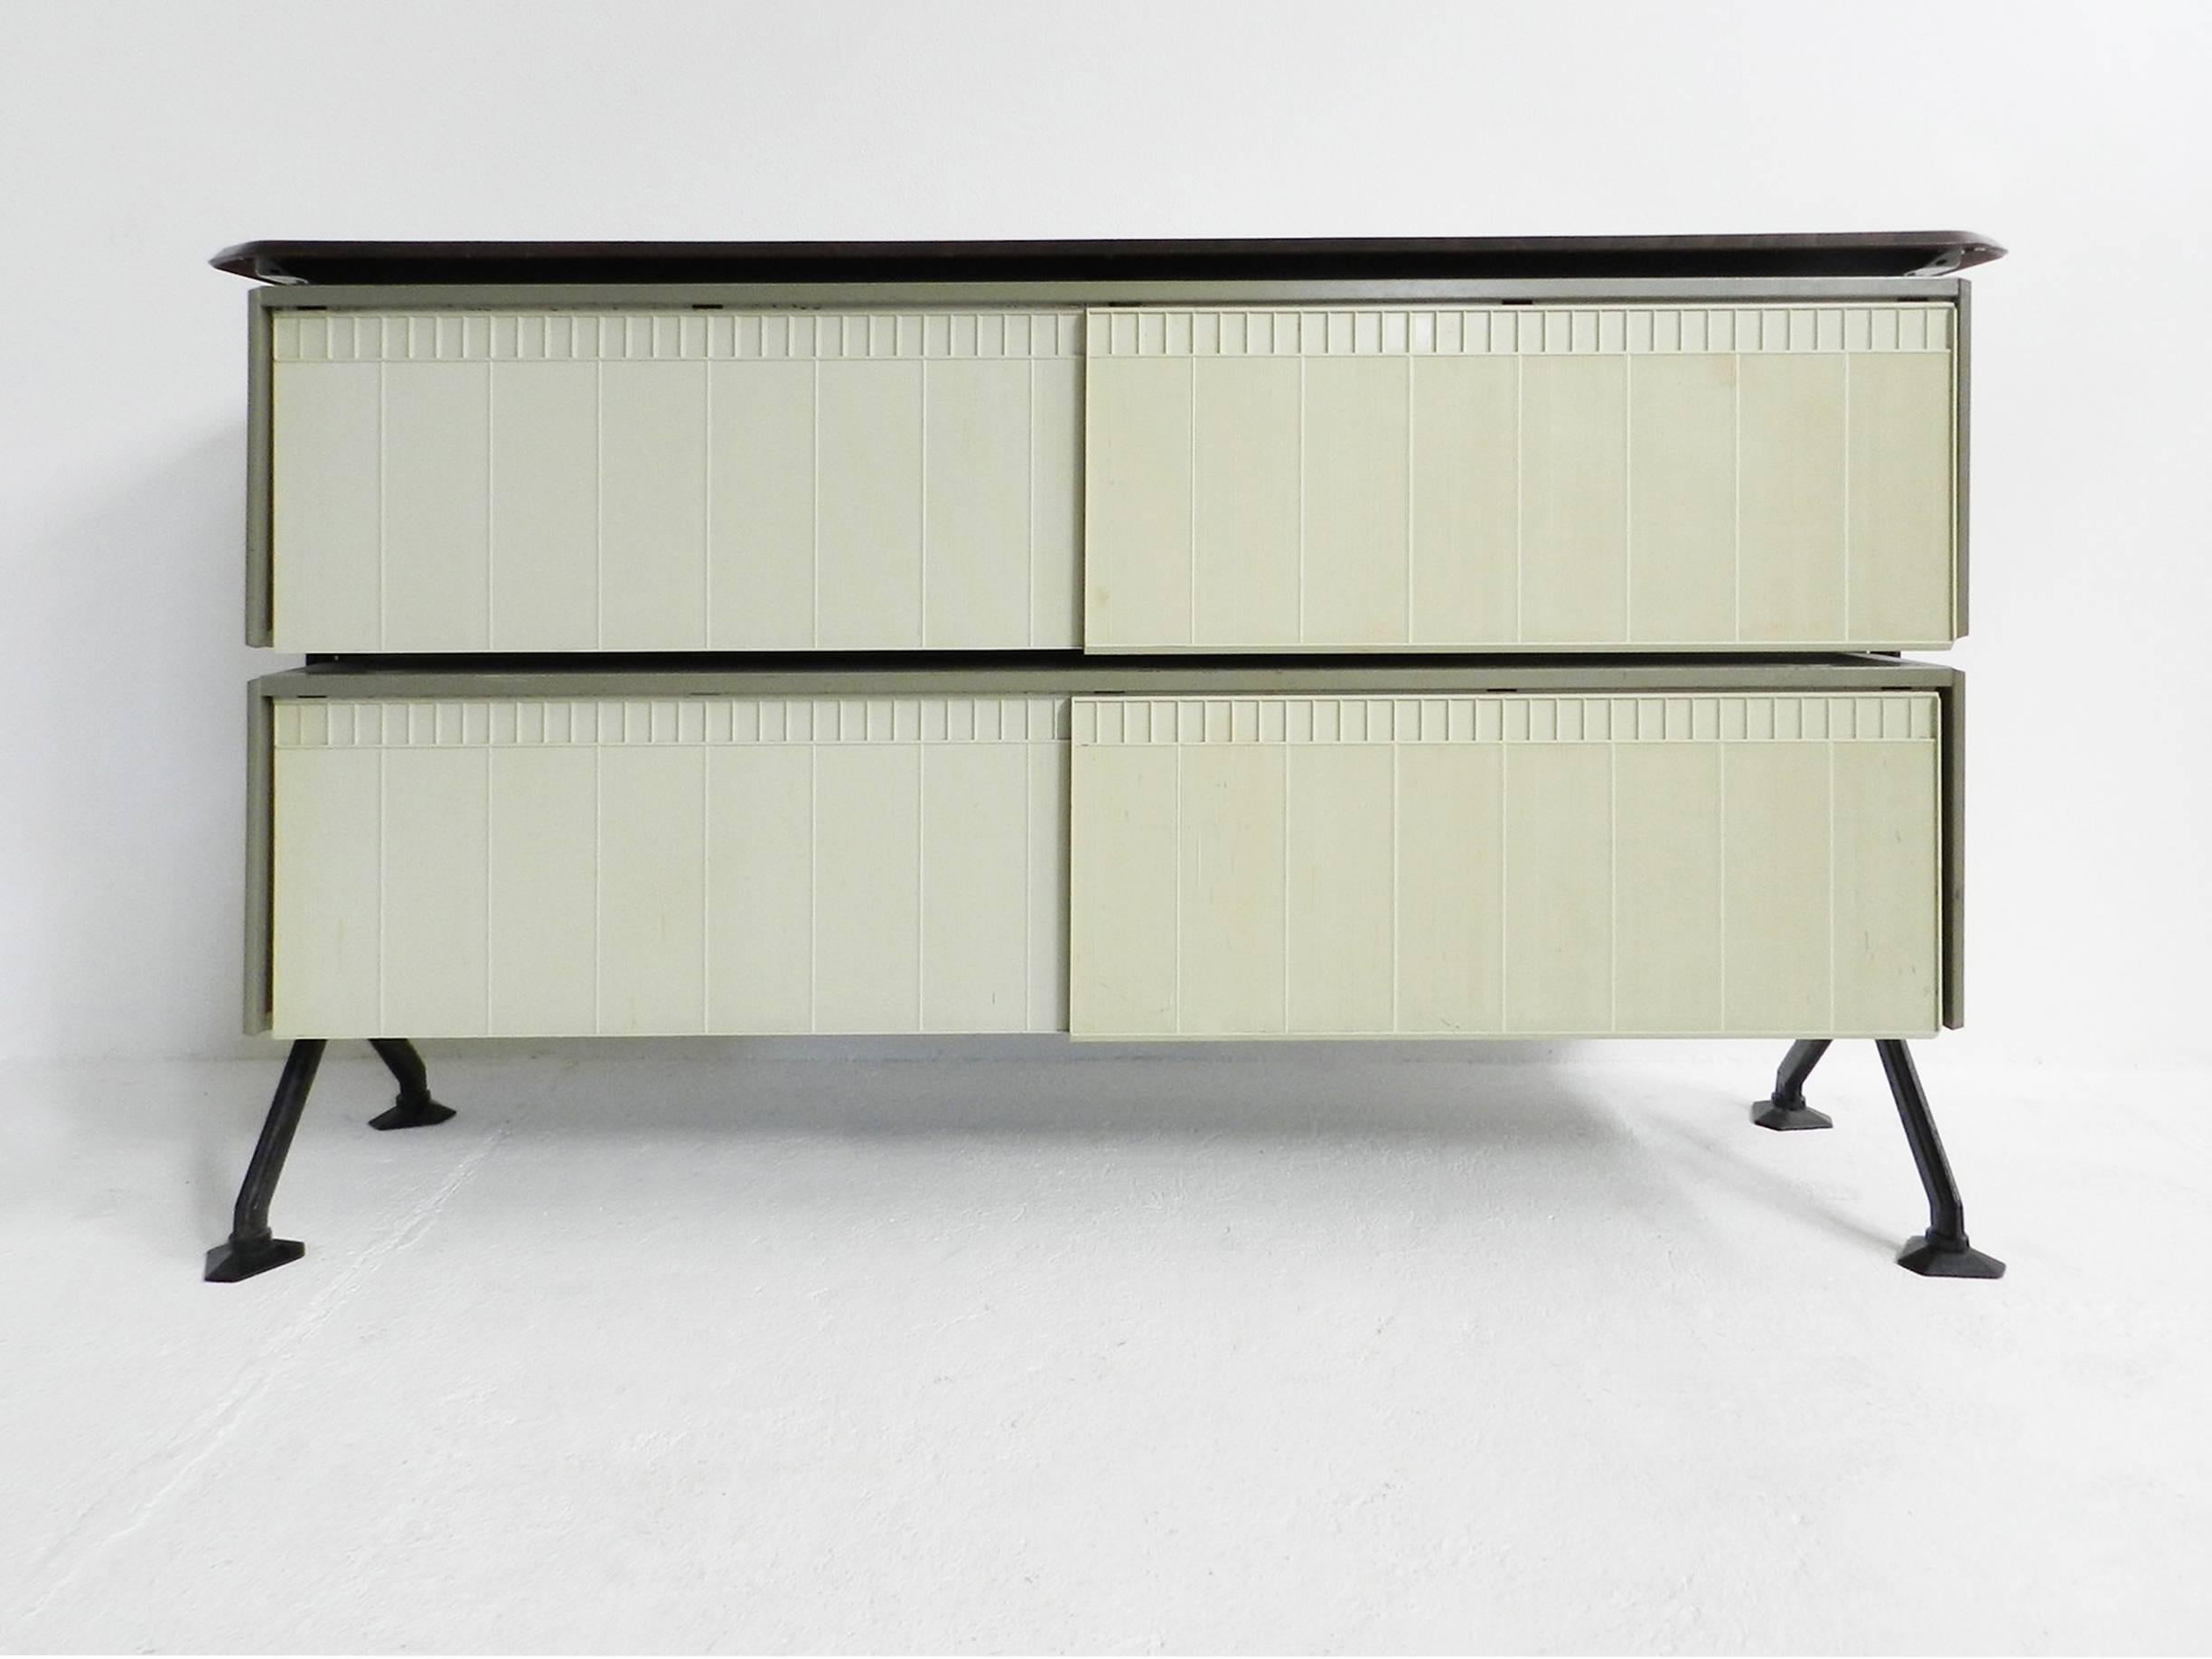 This series of furniture’s was designed in 1963 by BBPR for the Olivetti company.
BBPR was an architectural partnership founded in Milan in 1932 and composed of Banfi, Belgiojoso, Peressutti and Rogers. Tragically Banfi died in a concentration camp